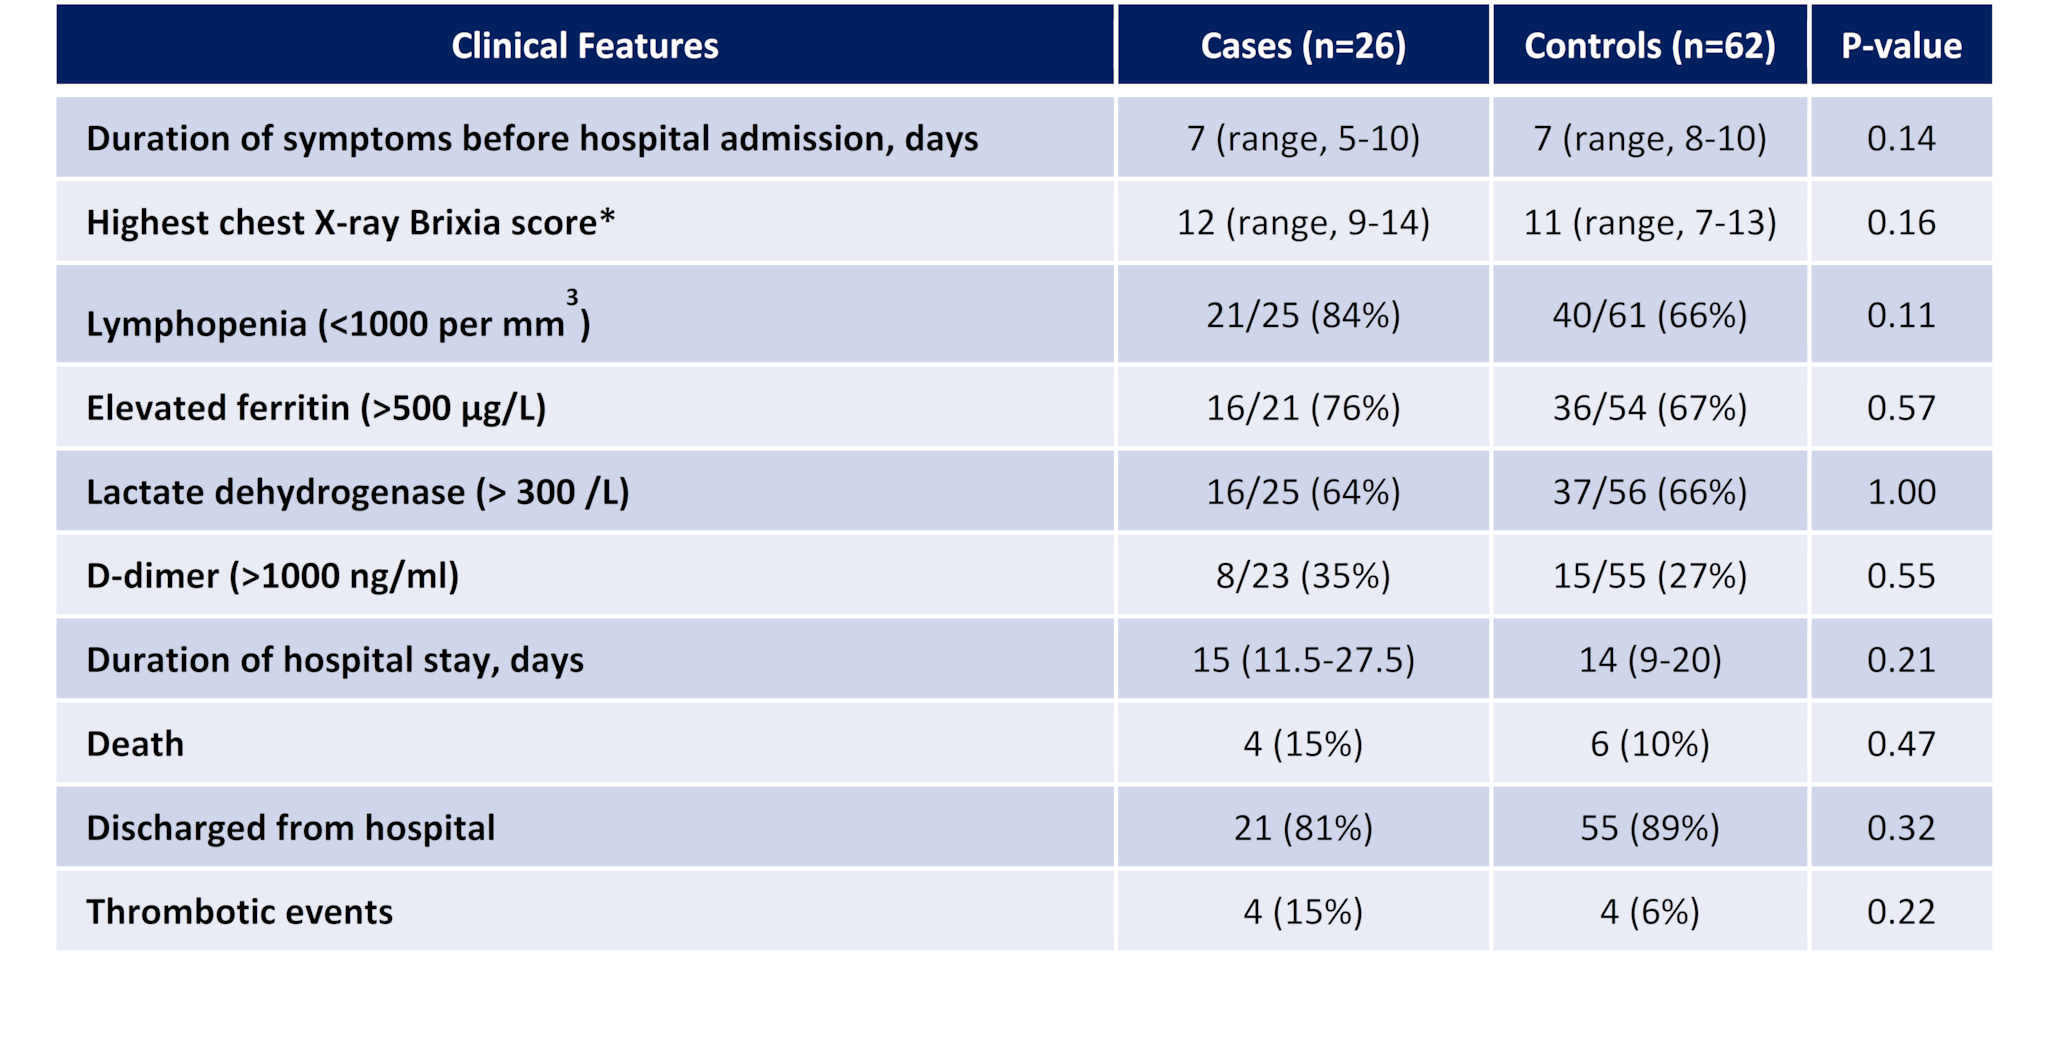 Select clinical characteristics of cases (COVID-19 pneumonia patients with musculoskeletal or rheumatic disease) and controls (age-, sex- and month of admission-matched COVID-19 pneumonia patients without musculoskeletal or rheumatic diseases).